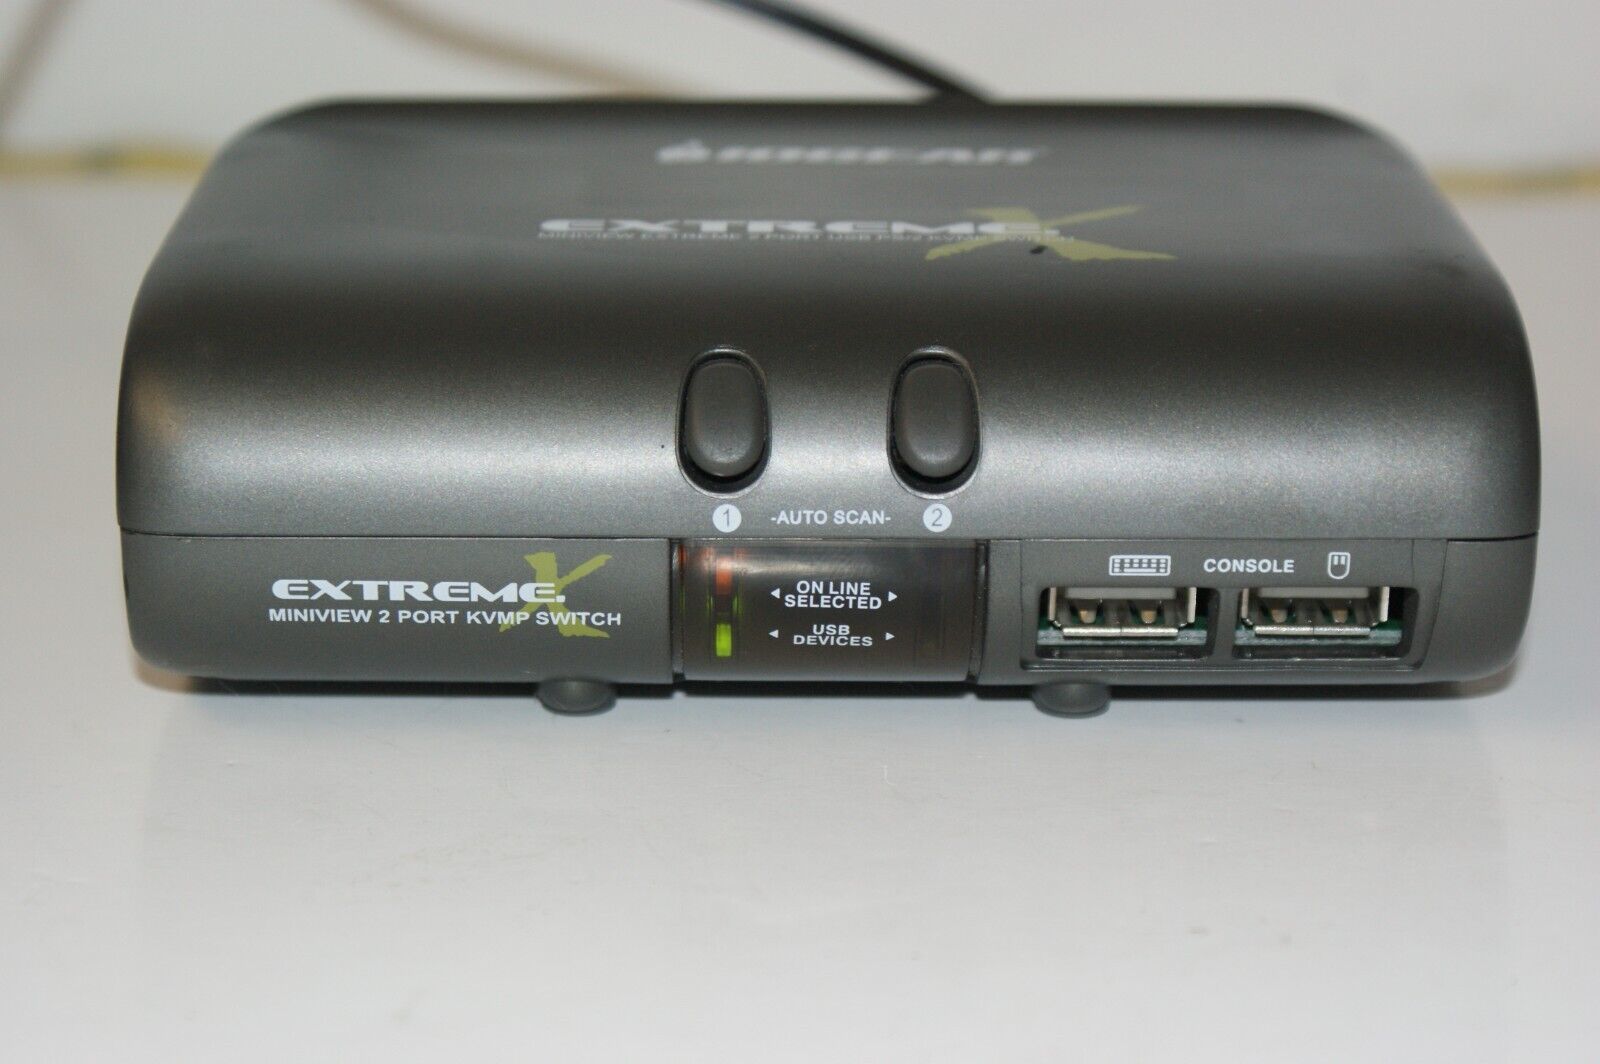 IOGear MiniView Extreme KVMP 2-Port Switch, No Cords, Tested